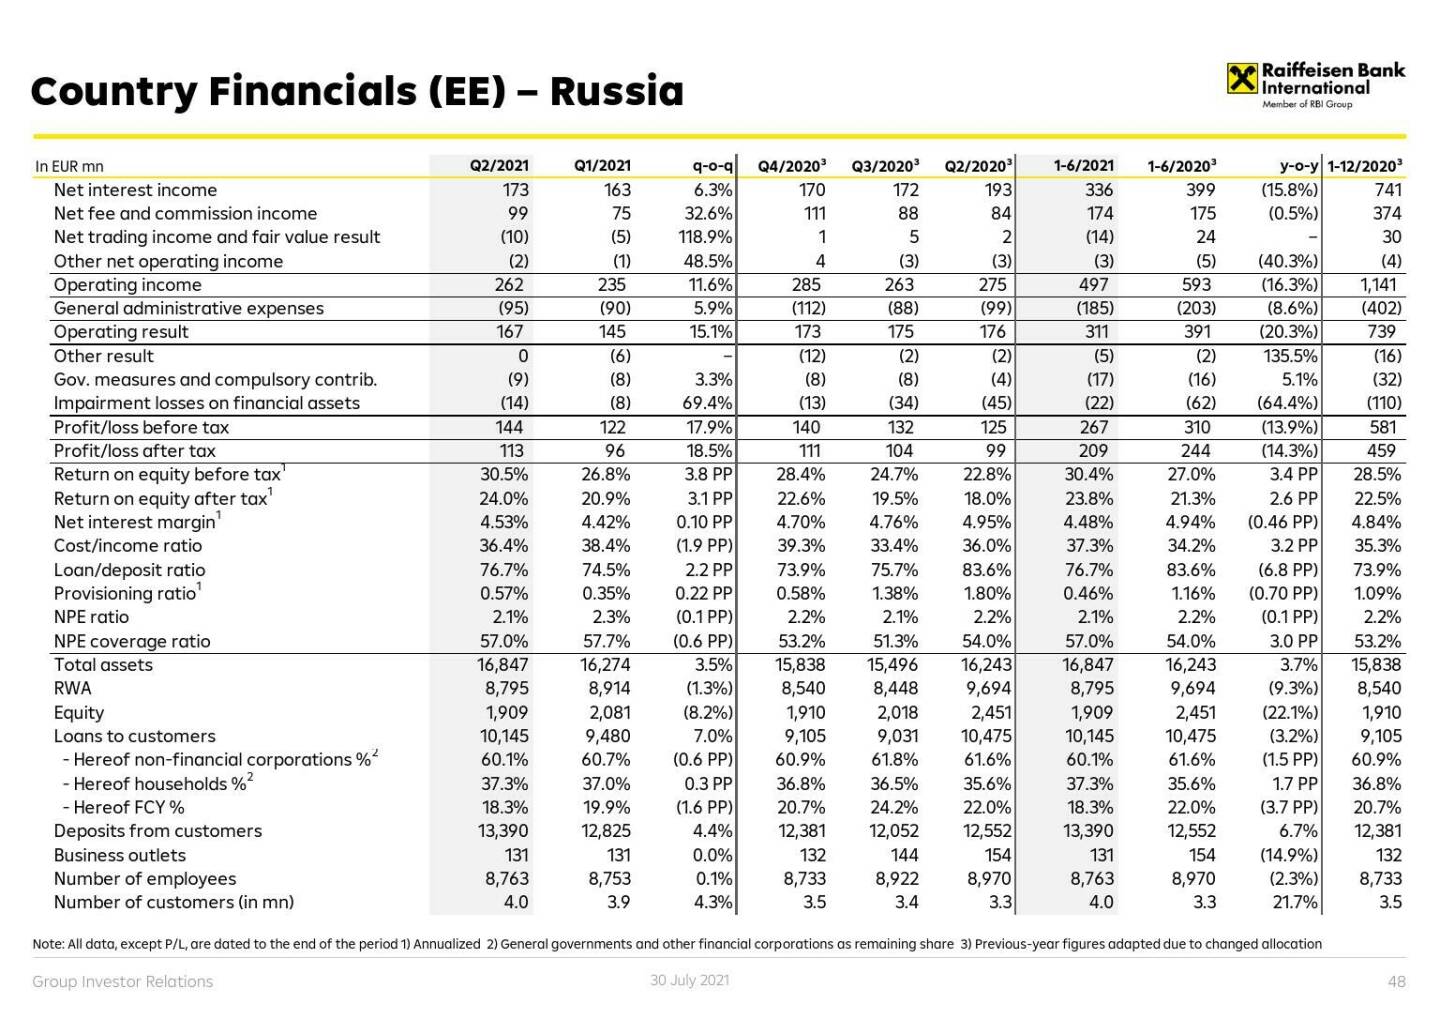 RBI - Country financials (CE) - Russia